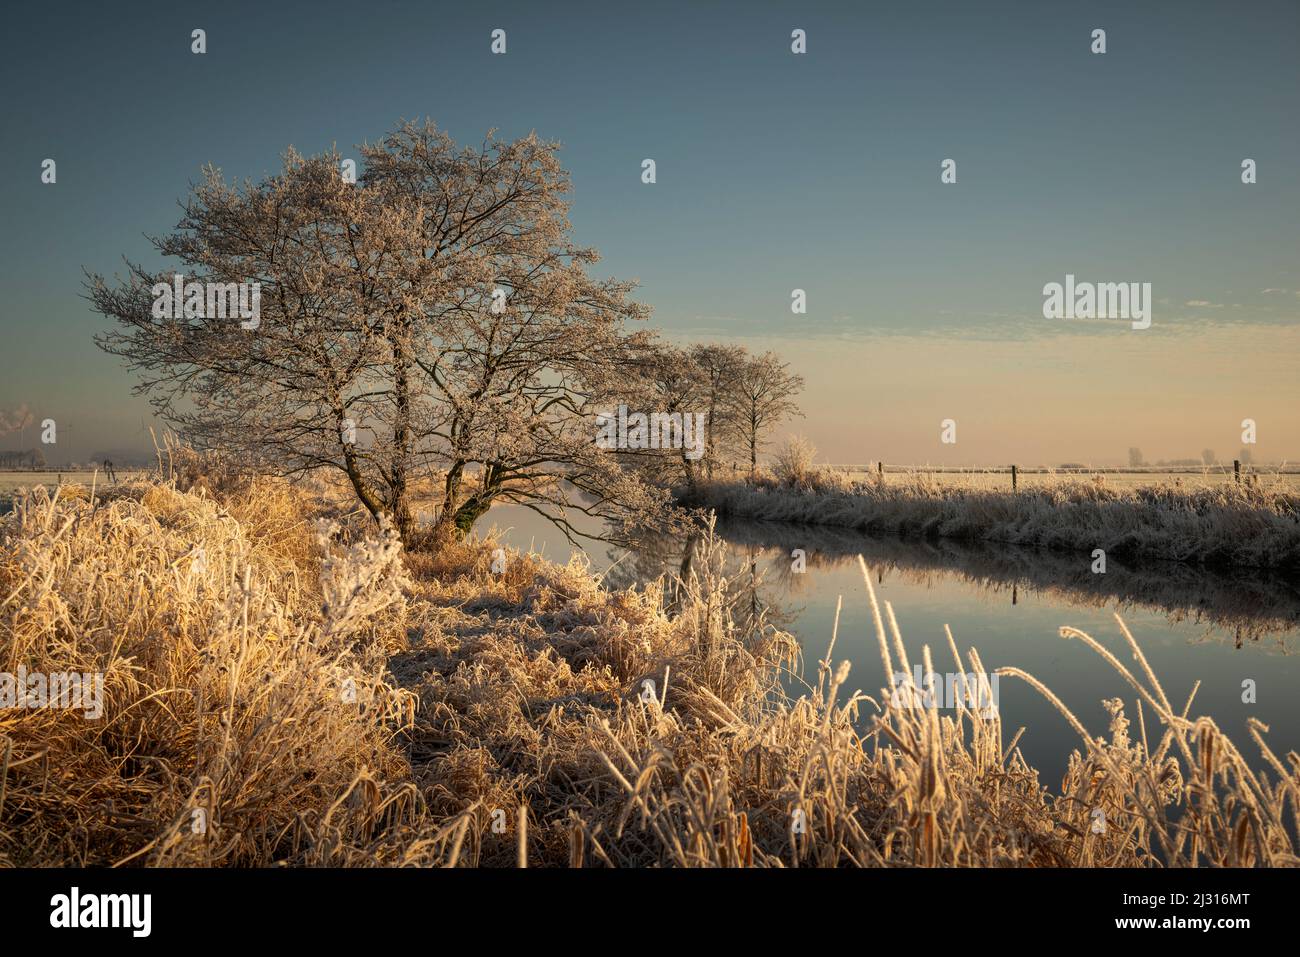 The Friedeburger Deep in frost in the sunlight, Etzel, East Friesland, Lower Saxony, Germany, Europe Stock Photo